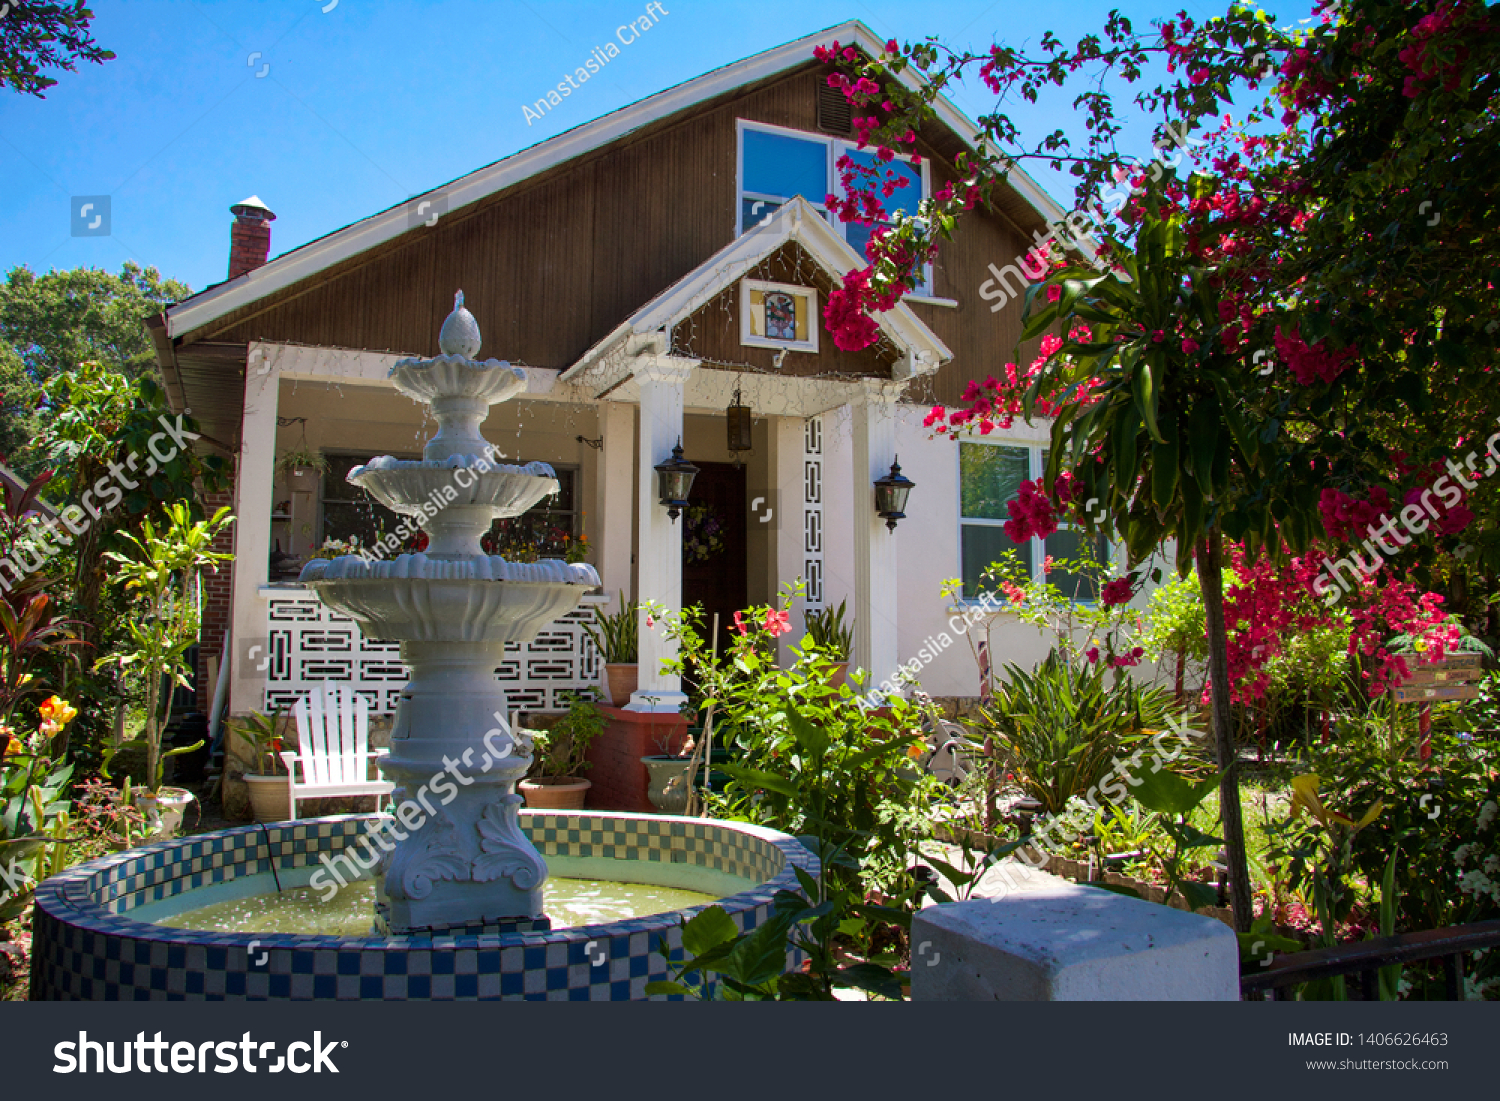 stock-photo-st-petersburg-florida-america-may-fountain-house-and-red-flowers-in-downtown-1406626463